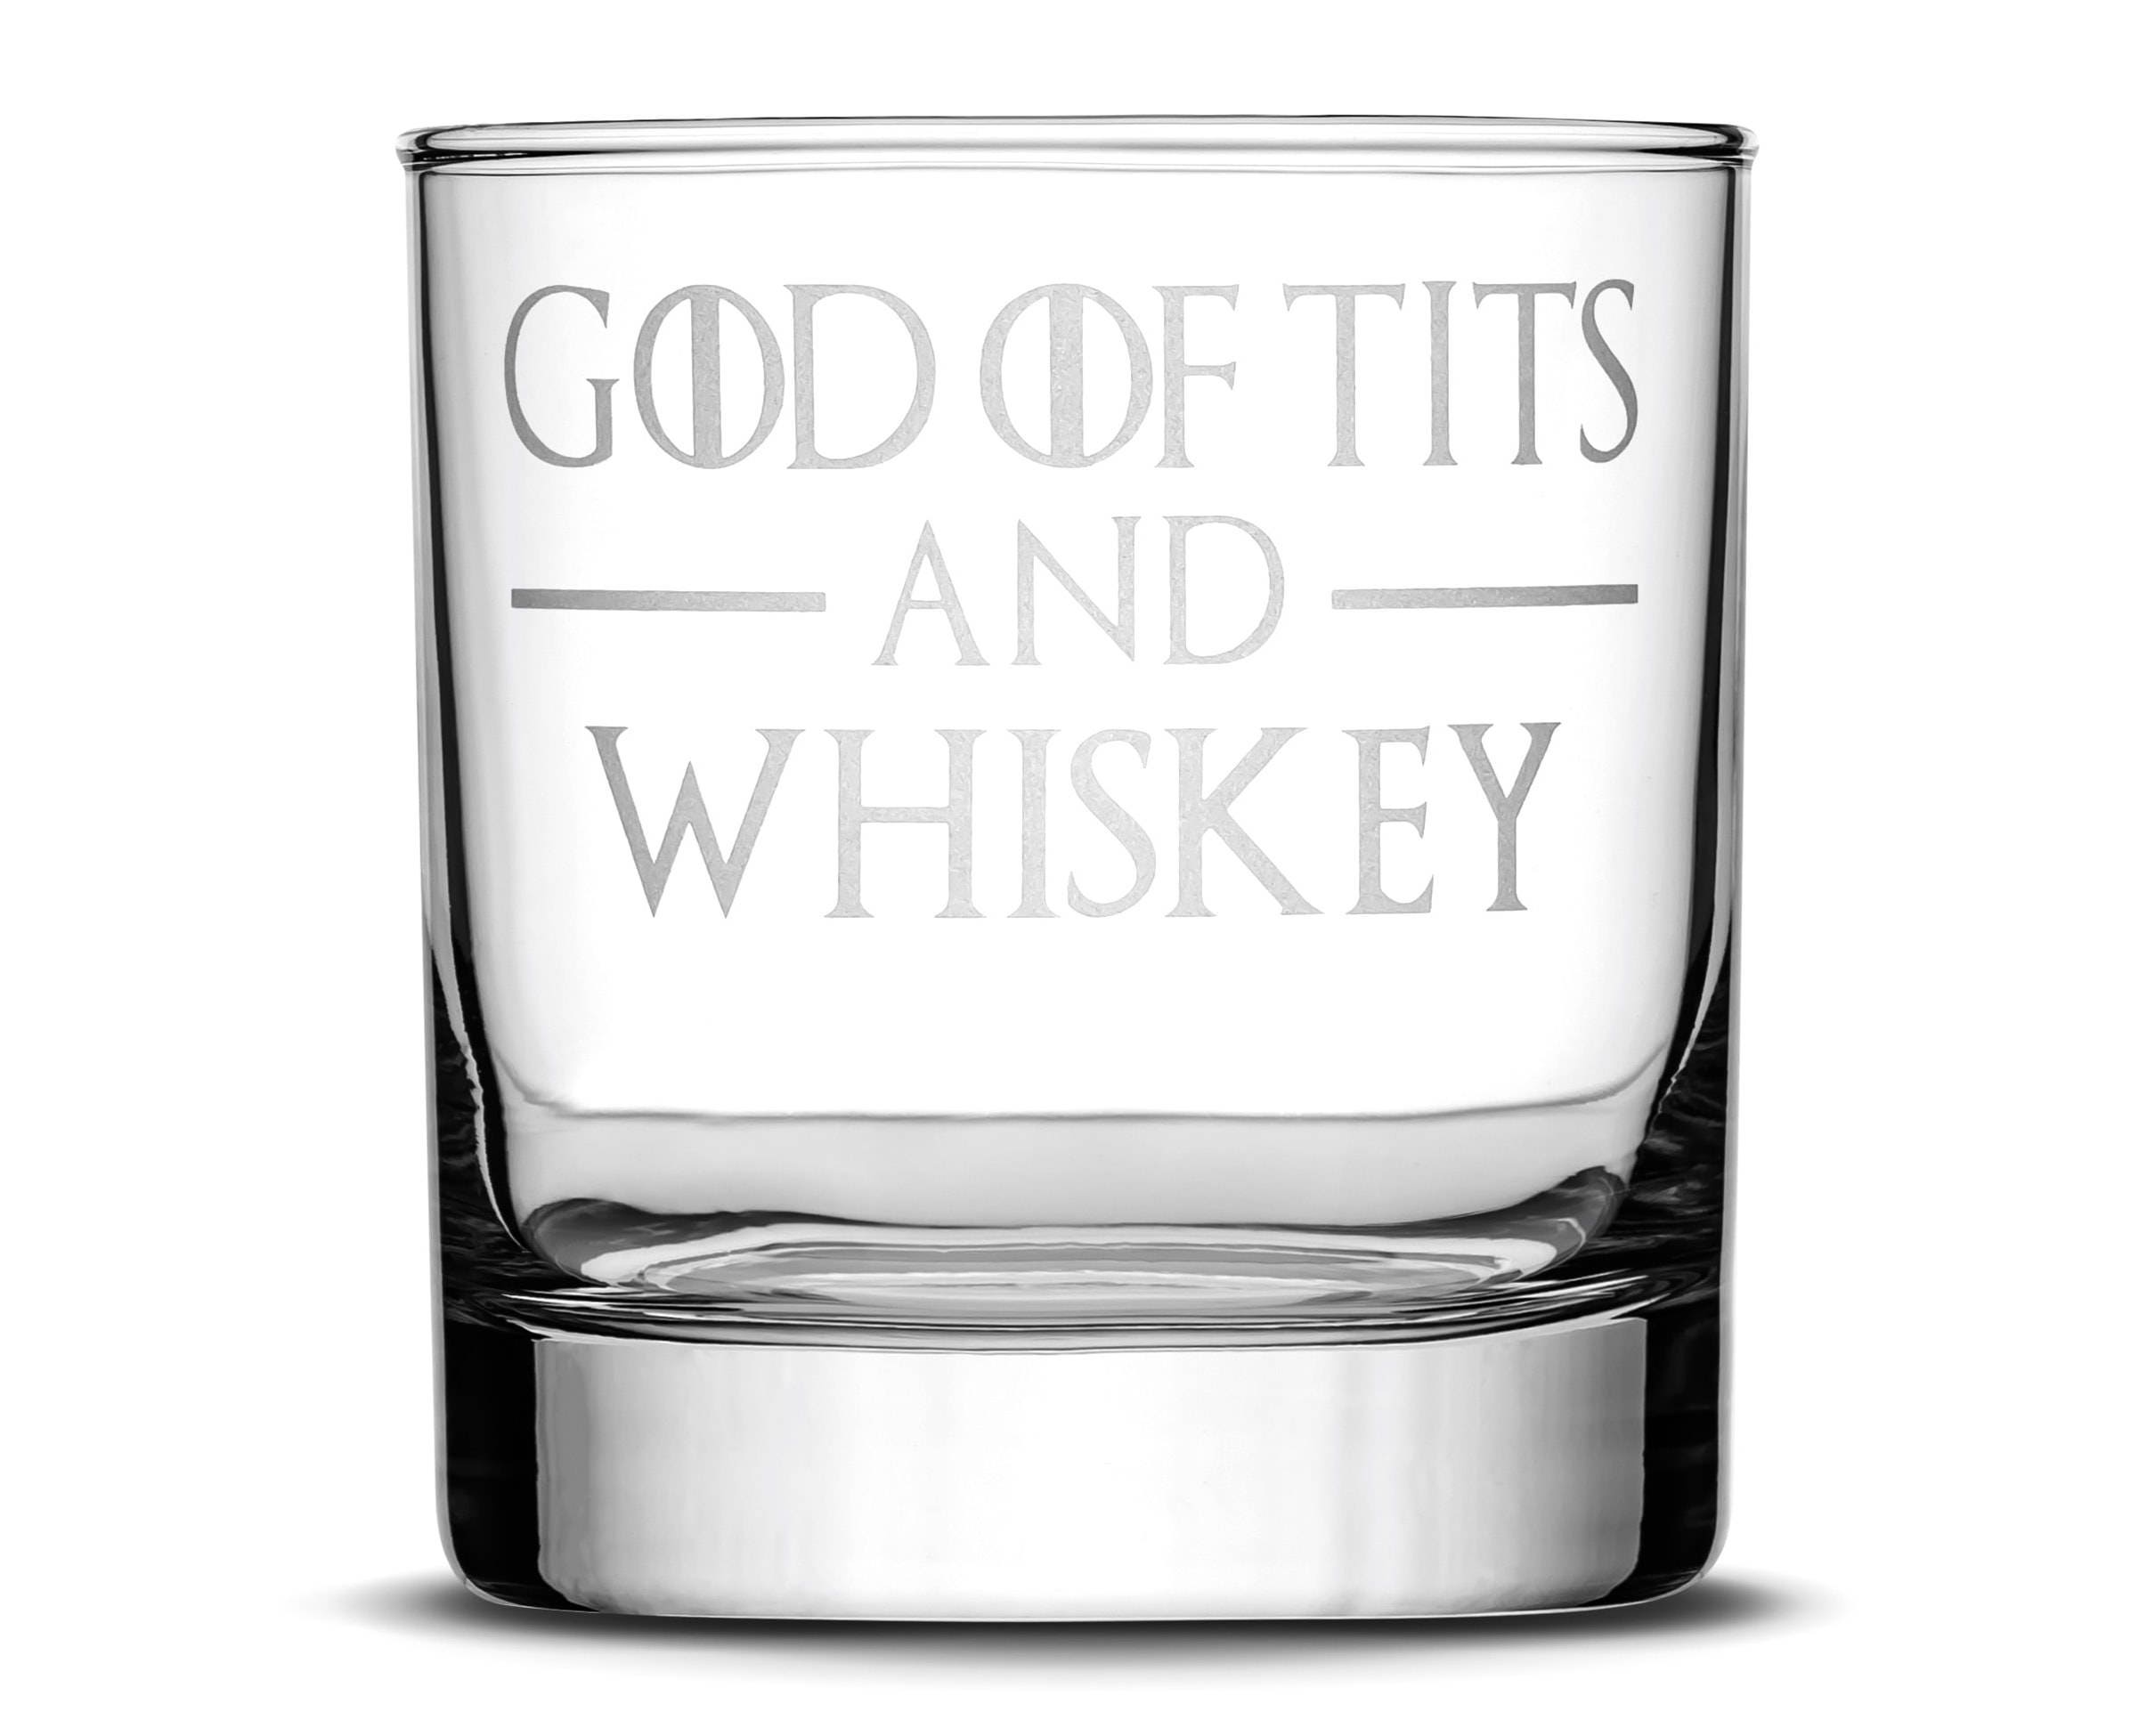 Game of Thrones Etched Whiskey Glass, 10oz Old Fashioned Rocks Glass, God of Tits and Whiskey, Sand Carved by Integrity Bottles